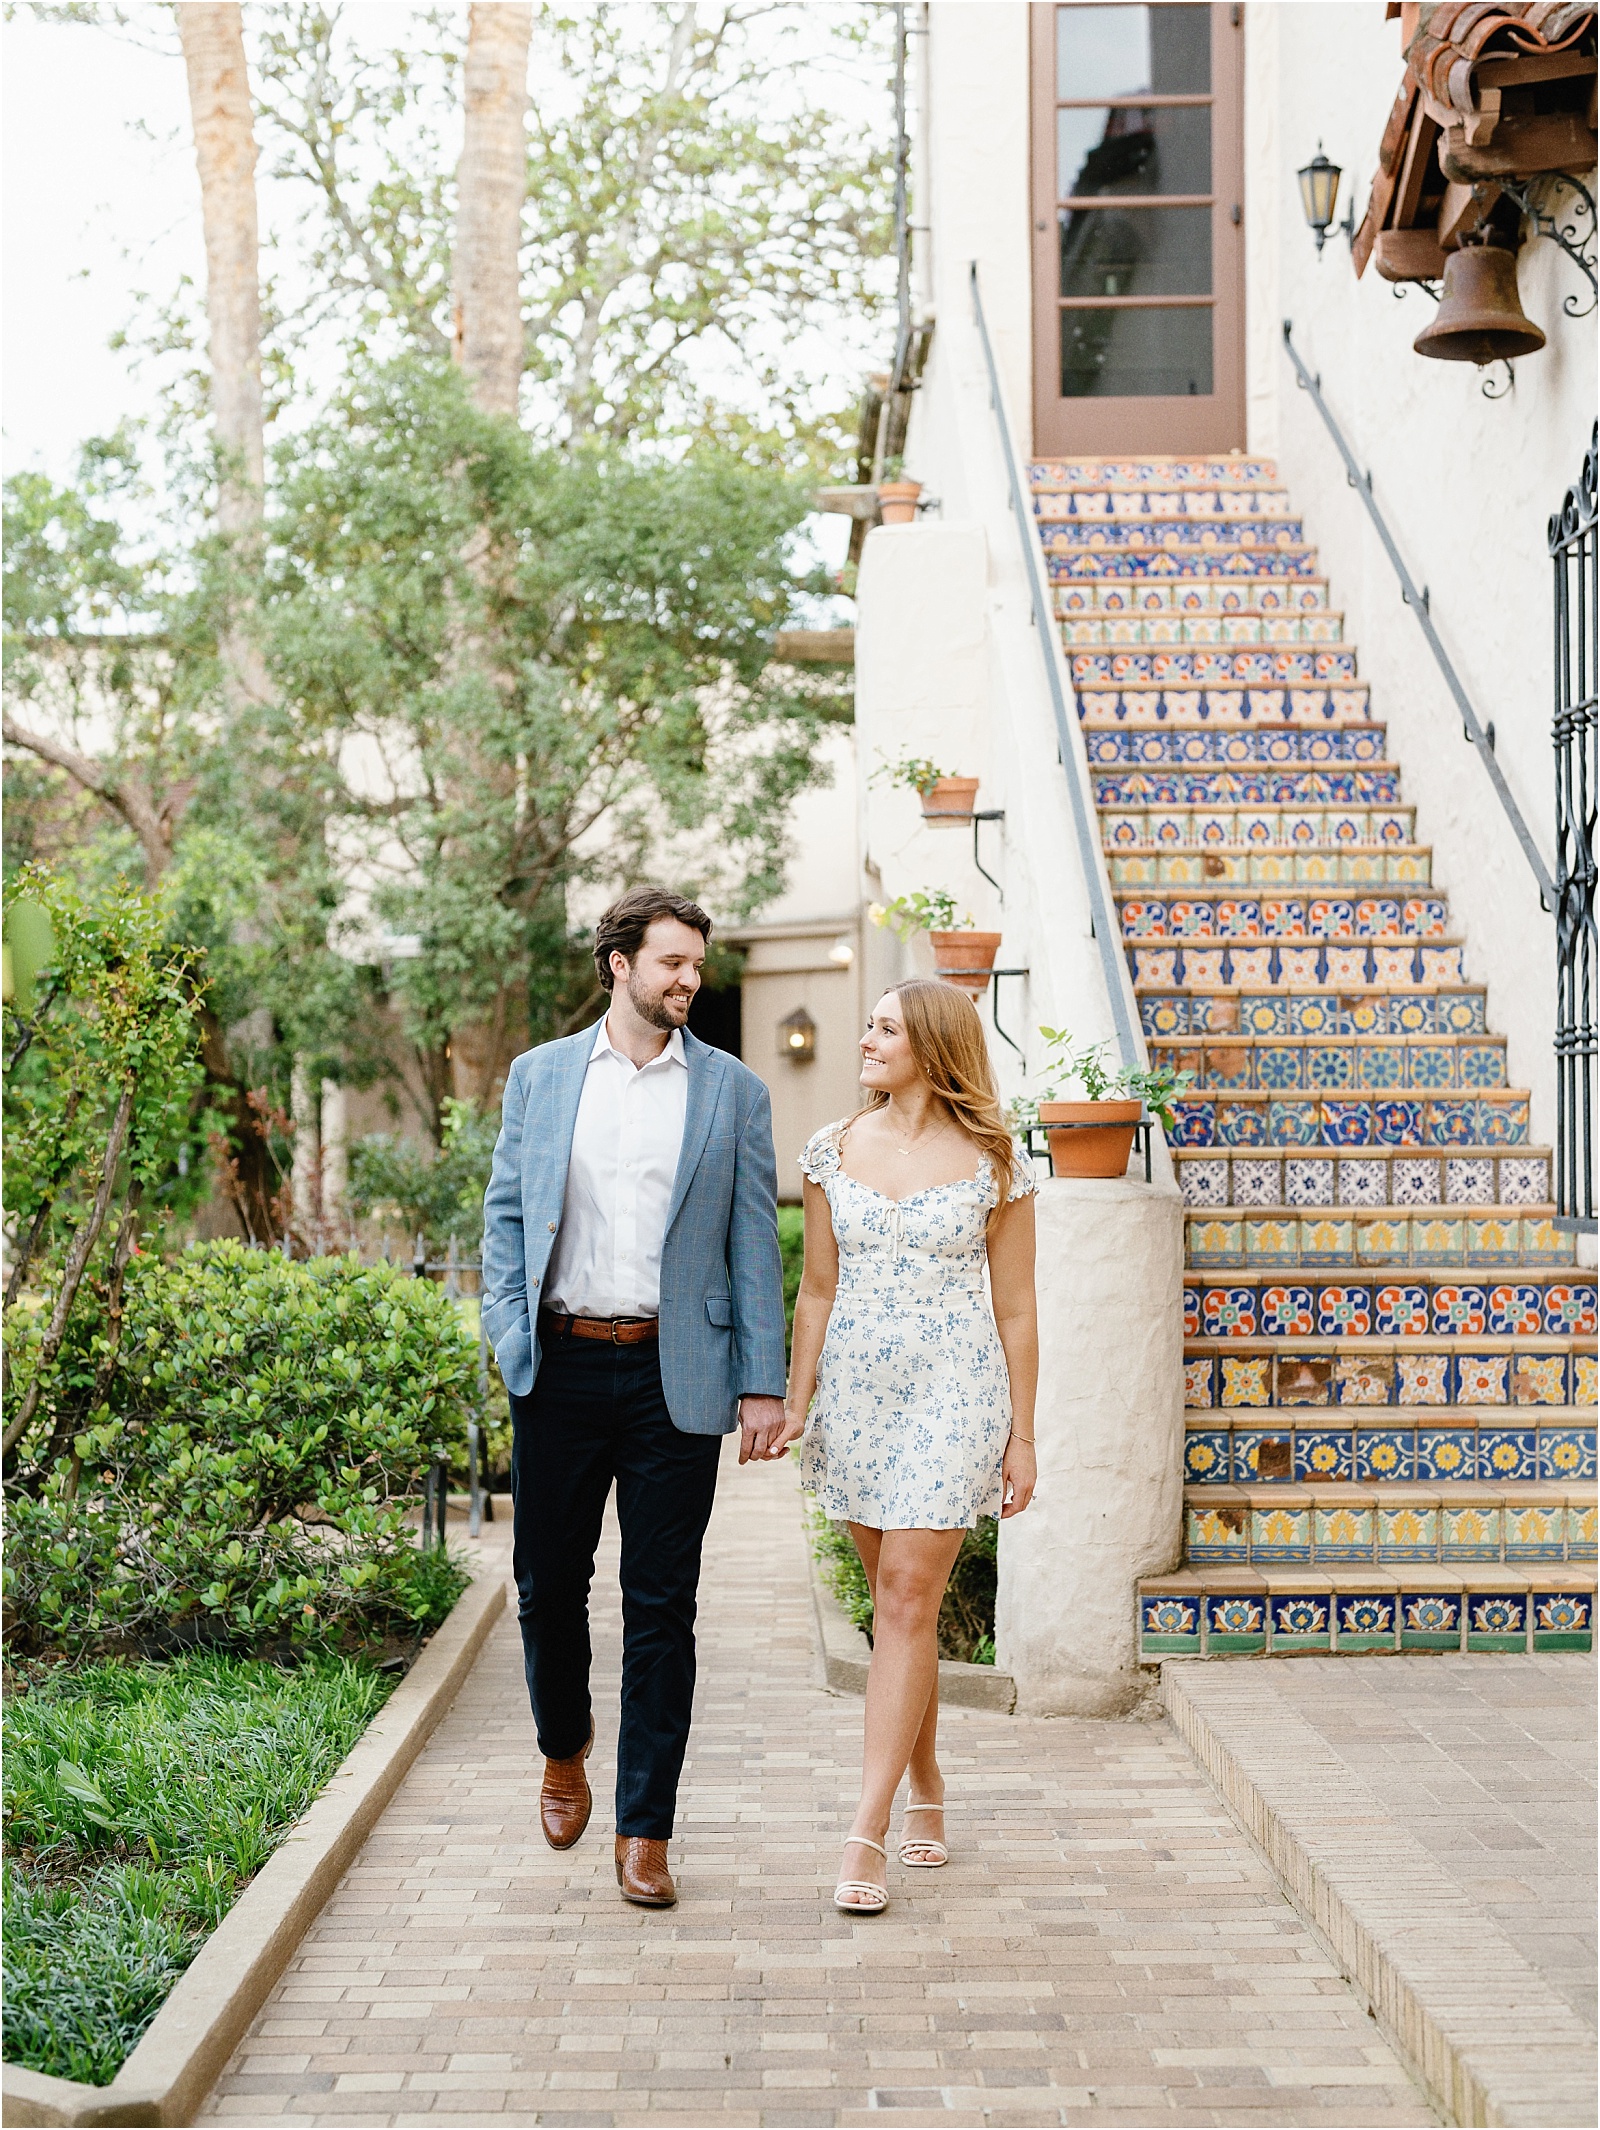 Dreamy and romantic engagement session at The McNay Art Museum in San Antonio, Texas.